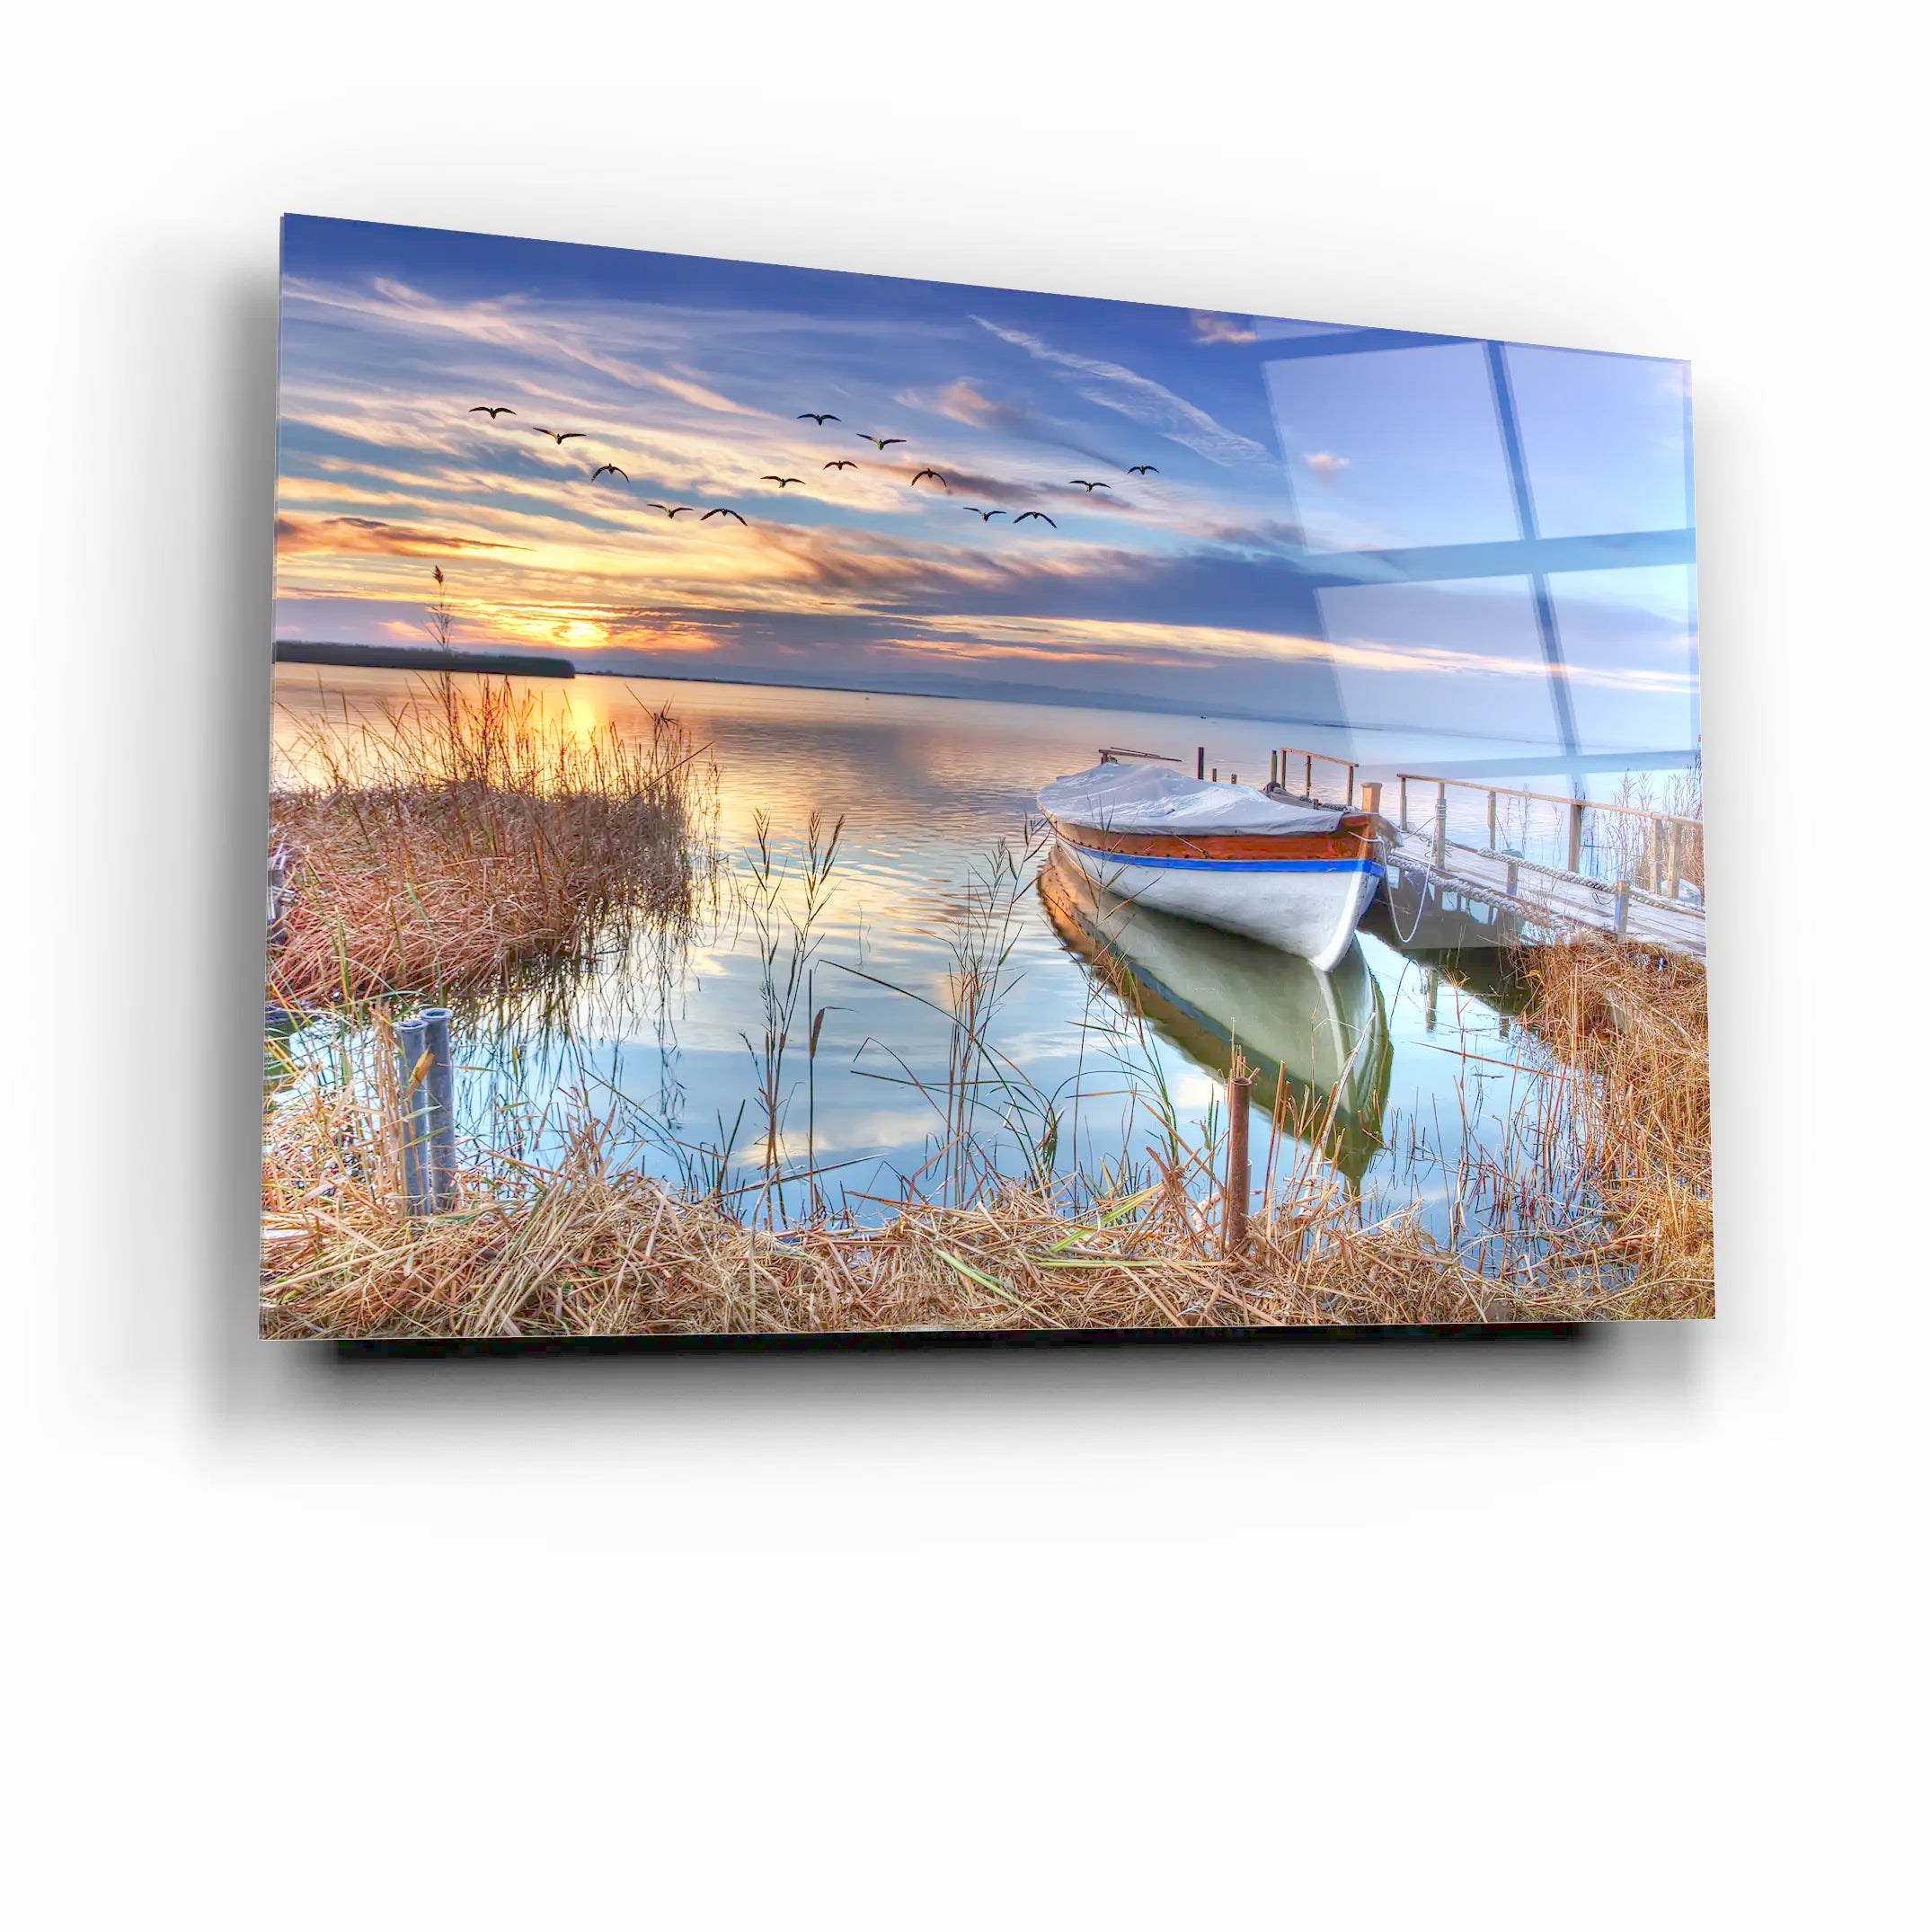 Boat on The Shore Glass Wall Art, Picture Made of Glass